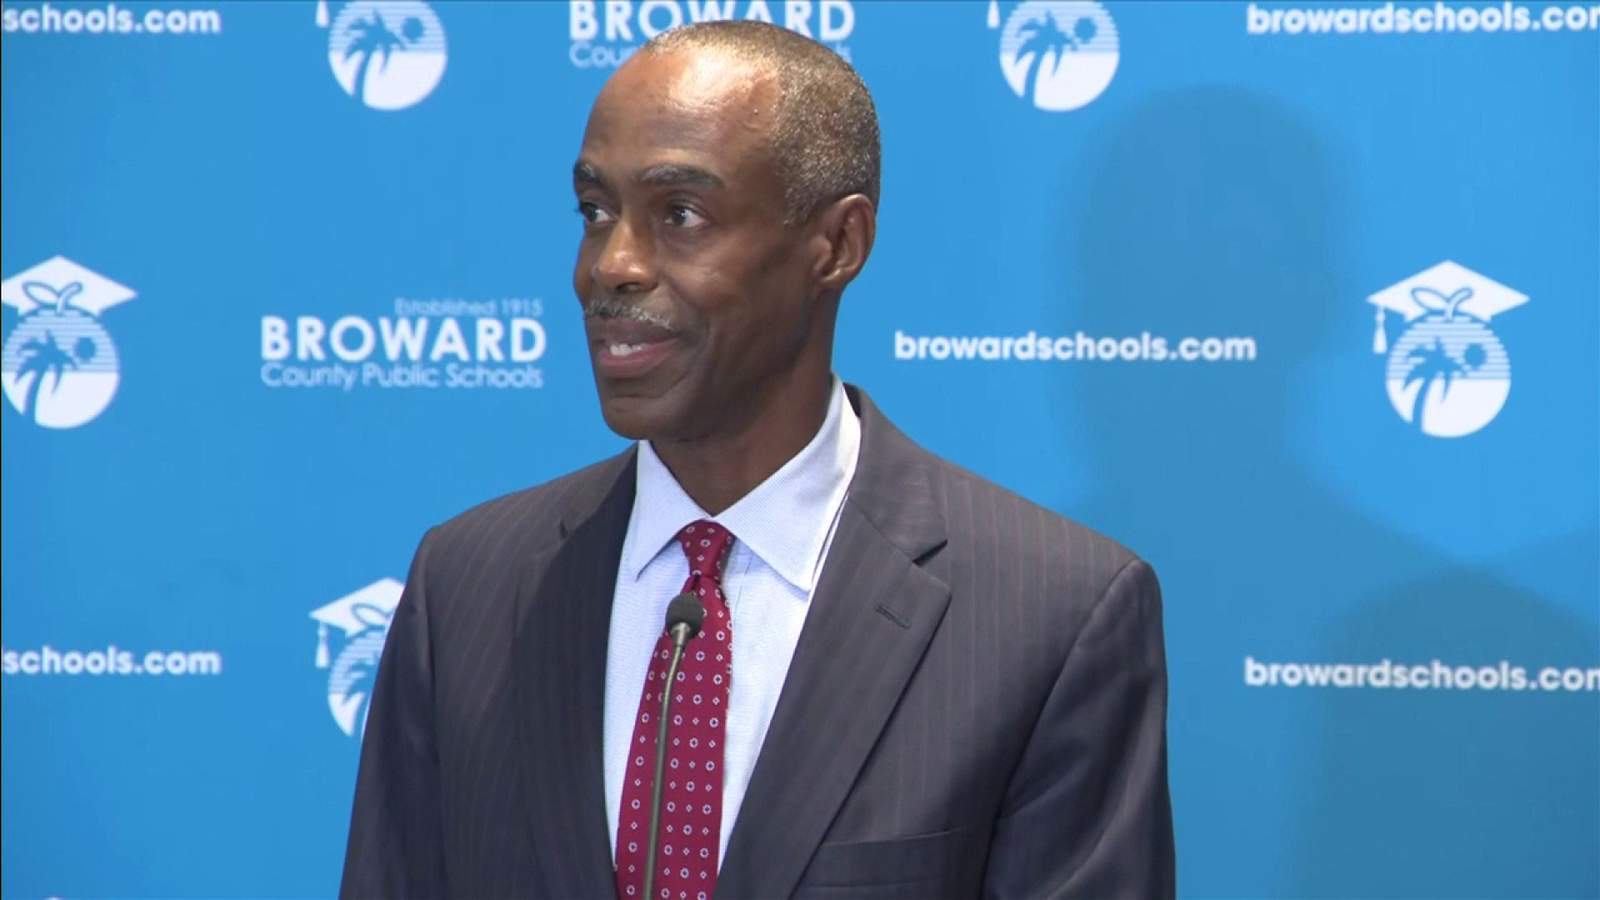 Broward Schools’ superintendent says more teachers needed in classrooms rather than online